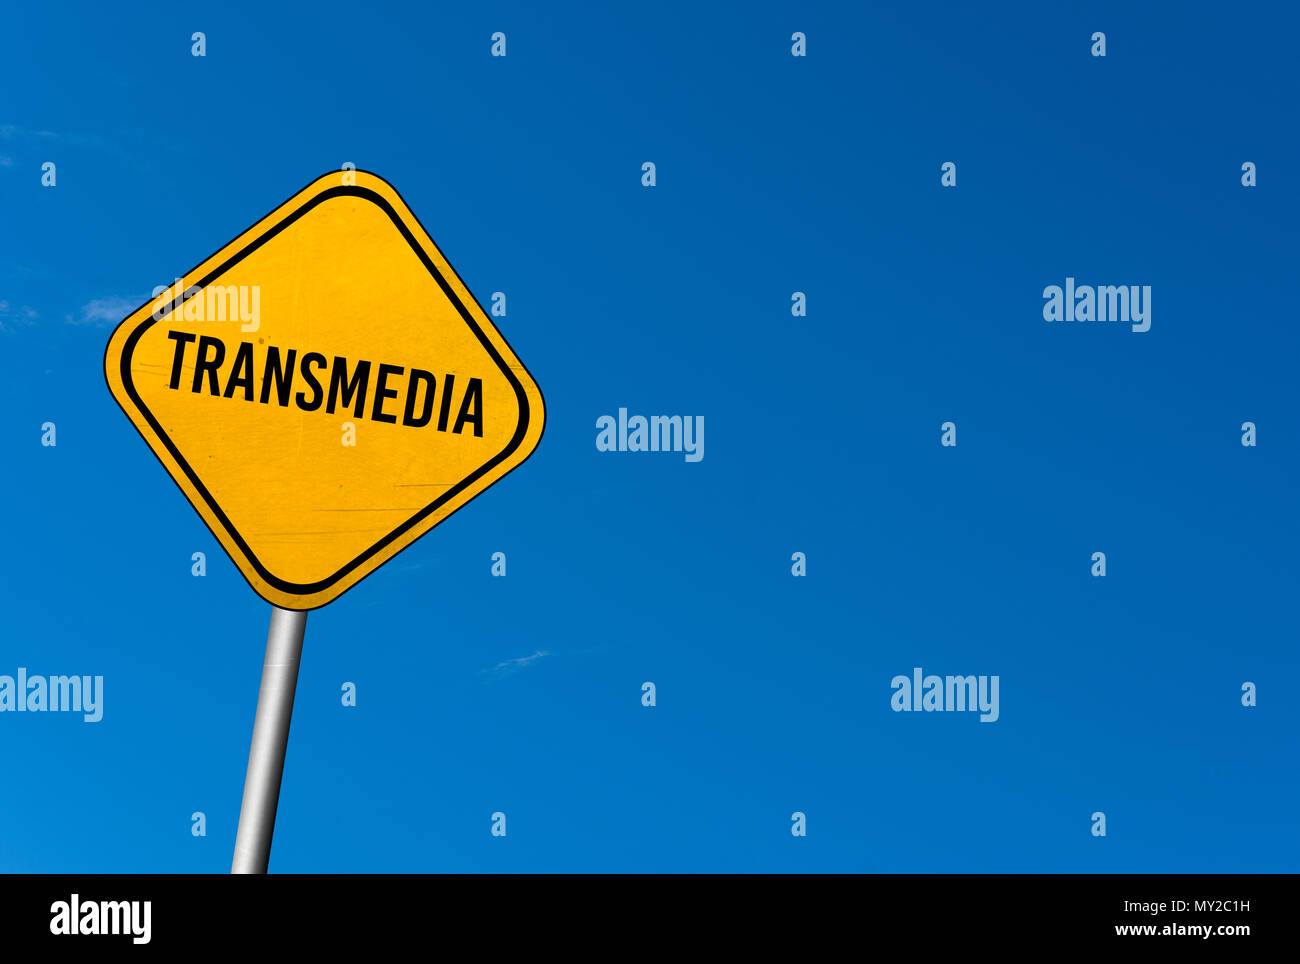 Transmedia - yellow sign with blue sky Stock Photo